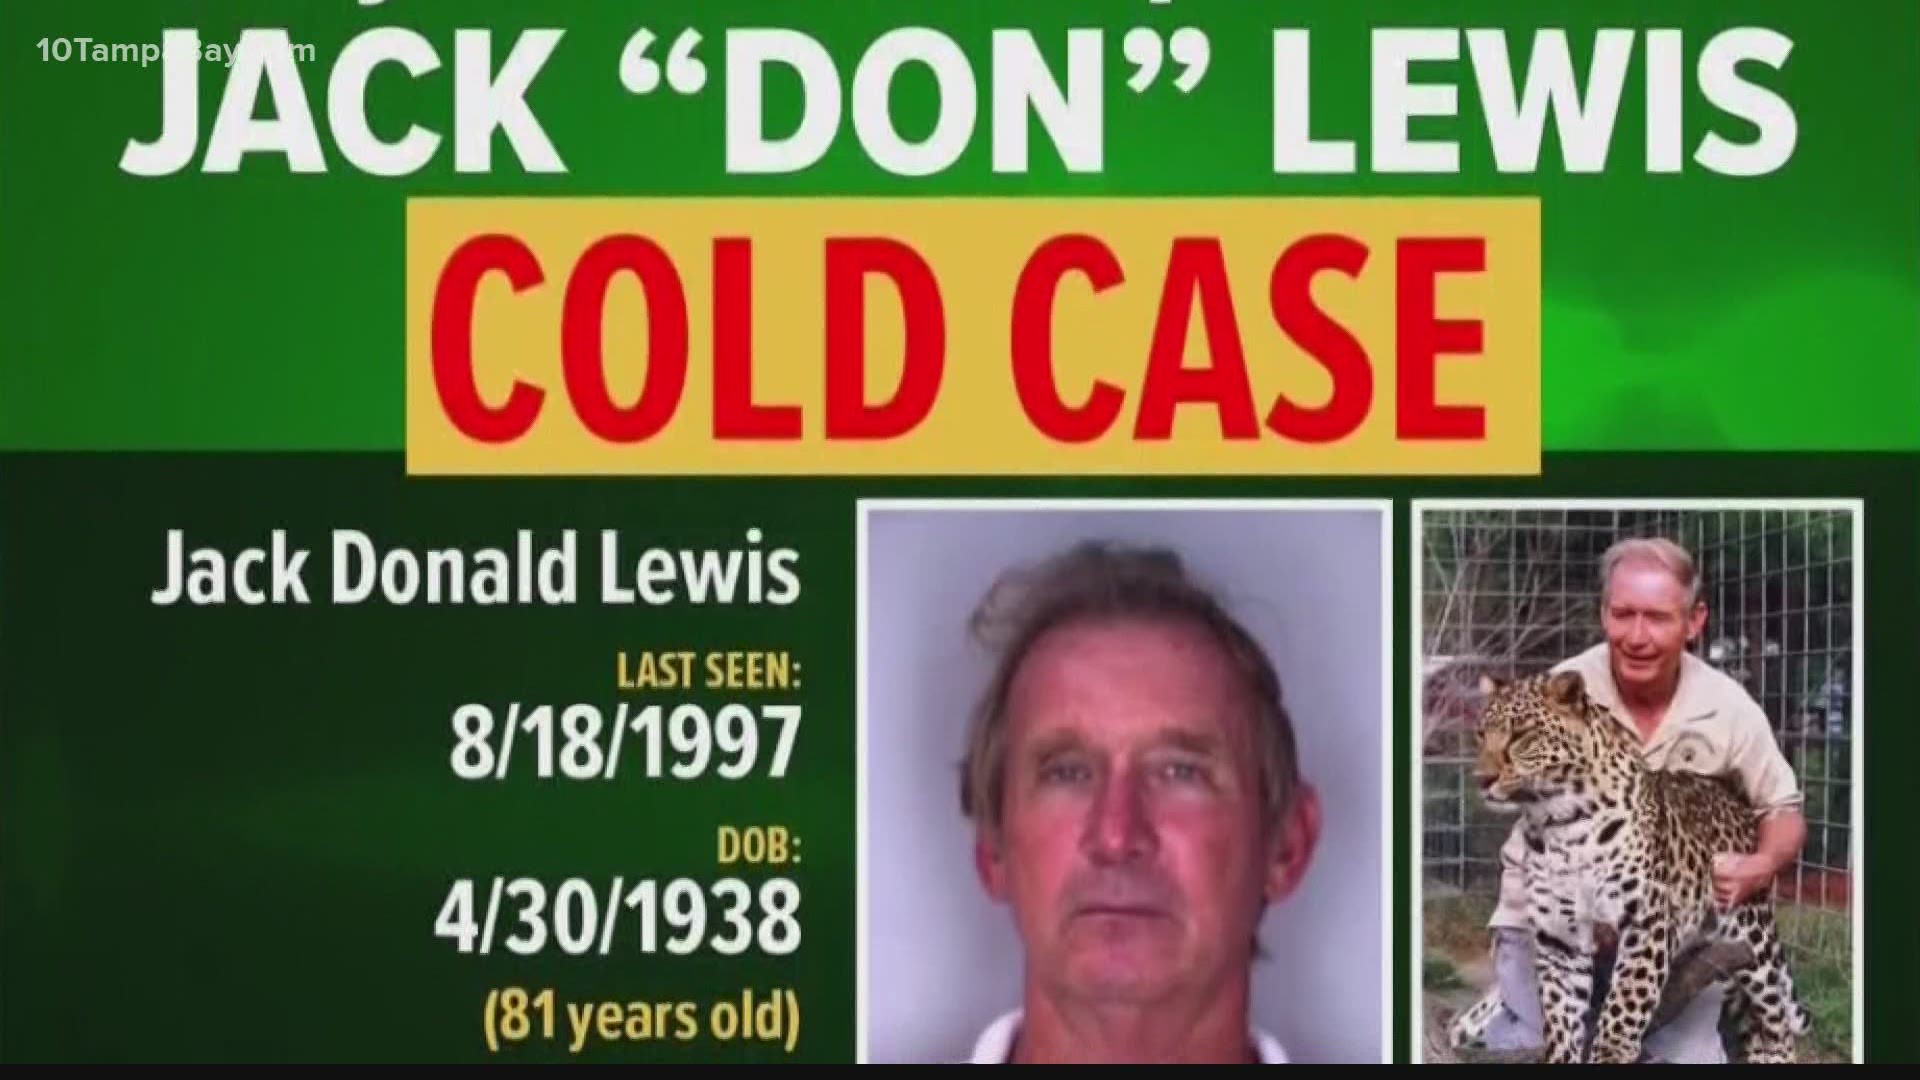 Jack "Don" Lewis' almost 23-year-old cold case resurfaced after the third episode looked into the disappearance of Big Cat Rescue CEO, Carole Baskin's ex-husband.